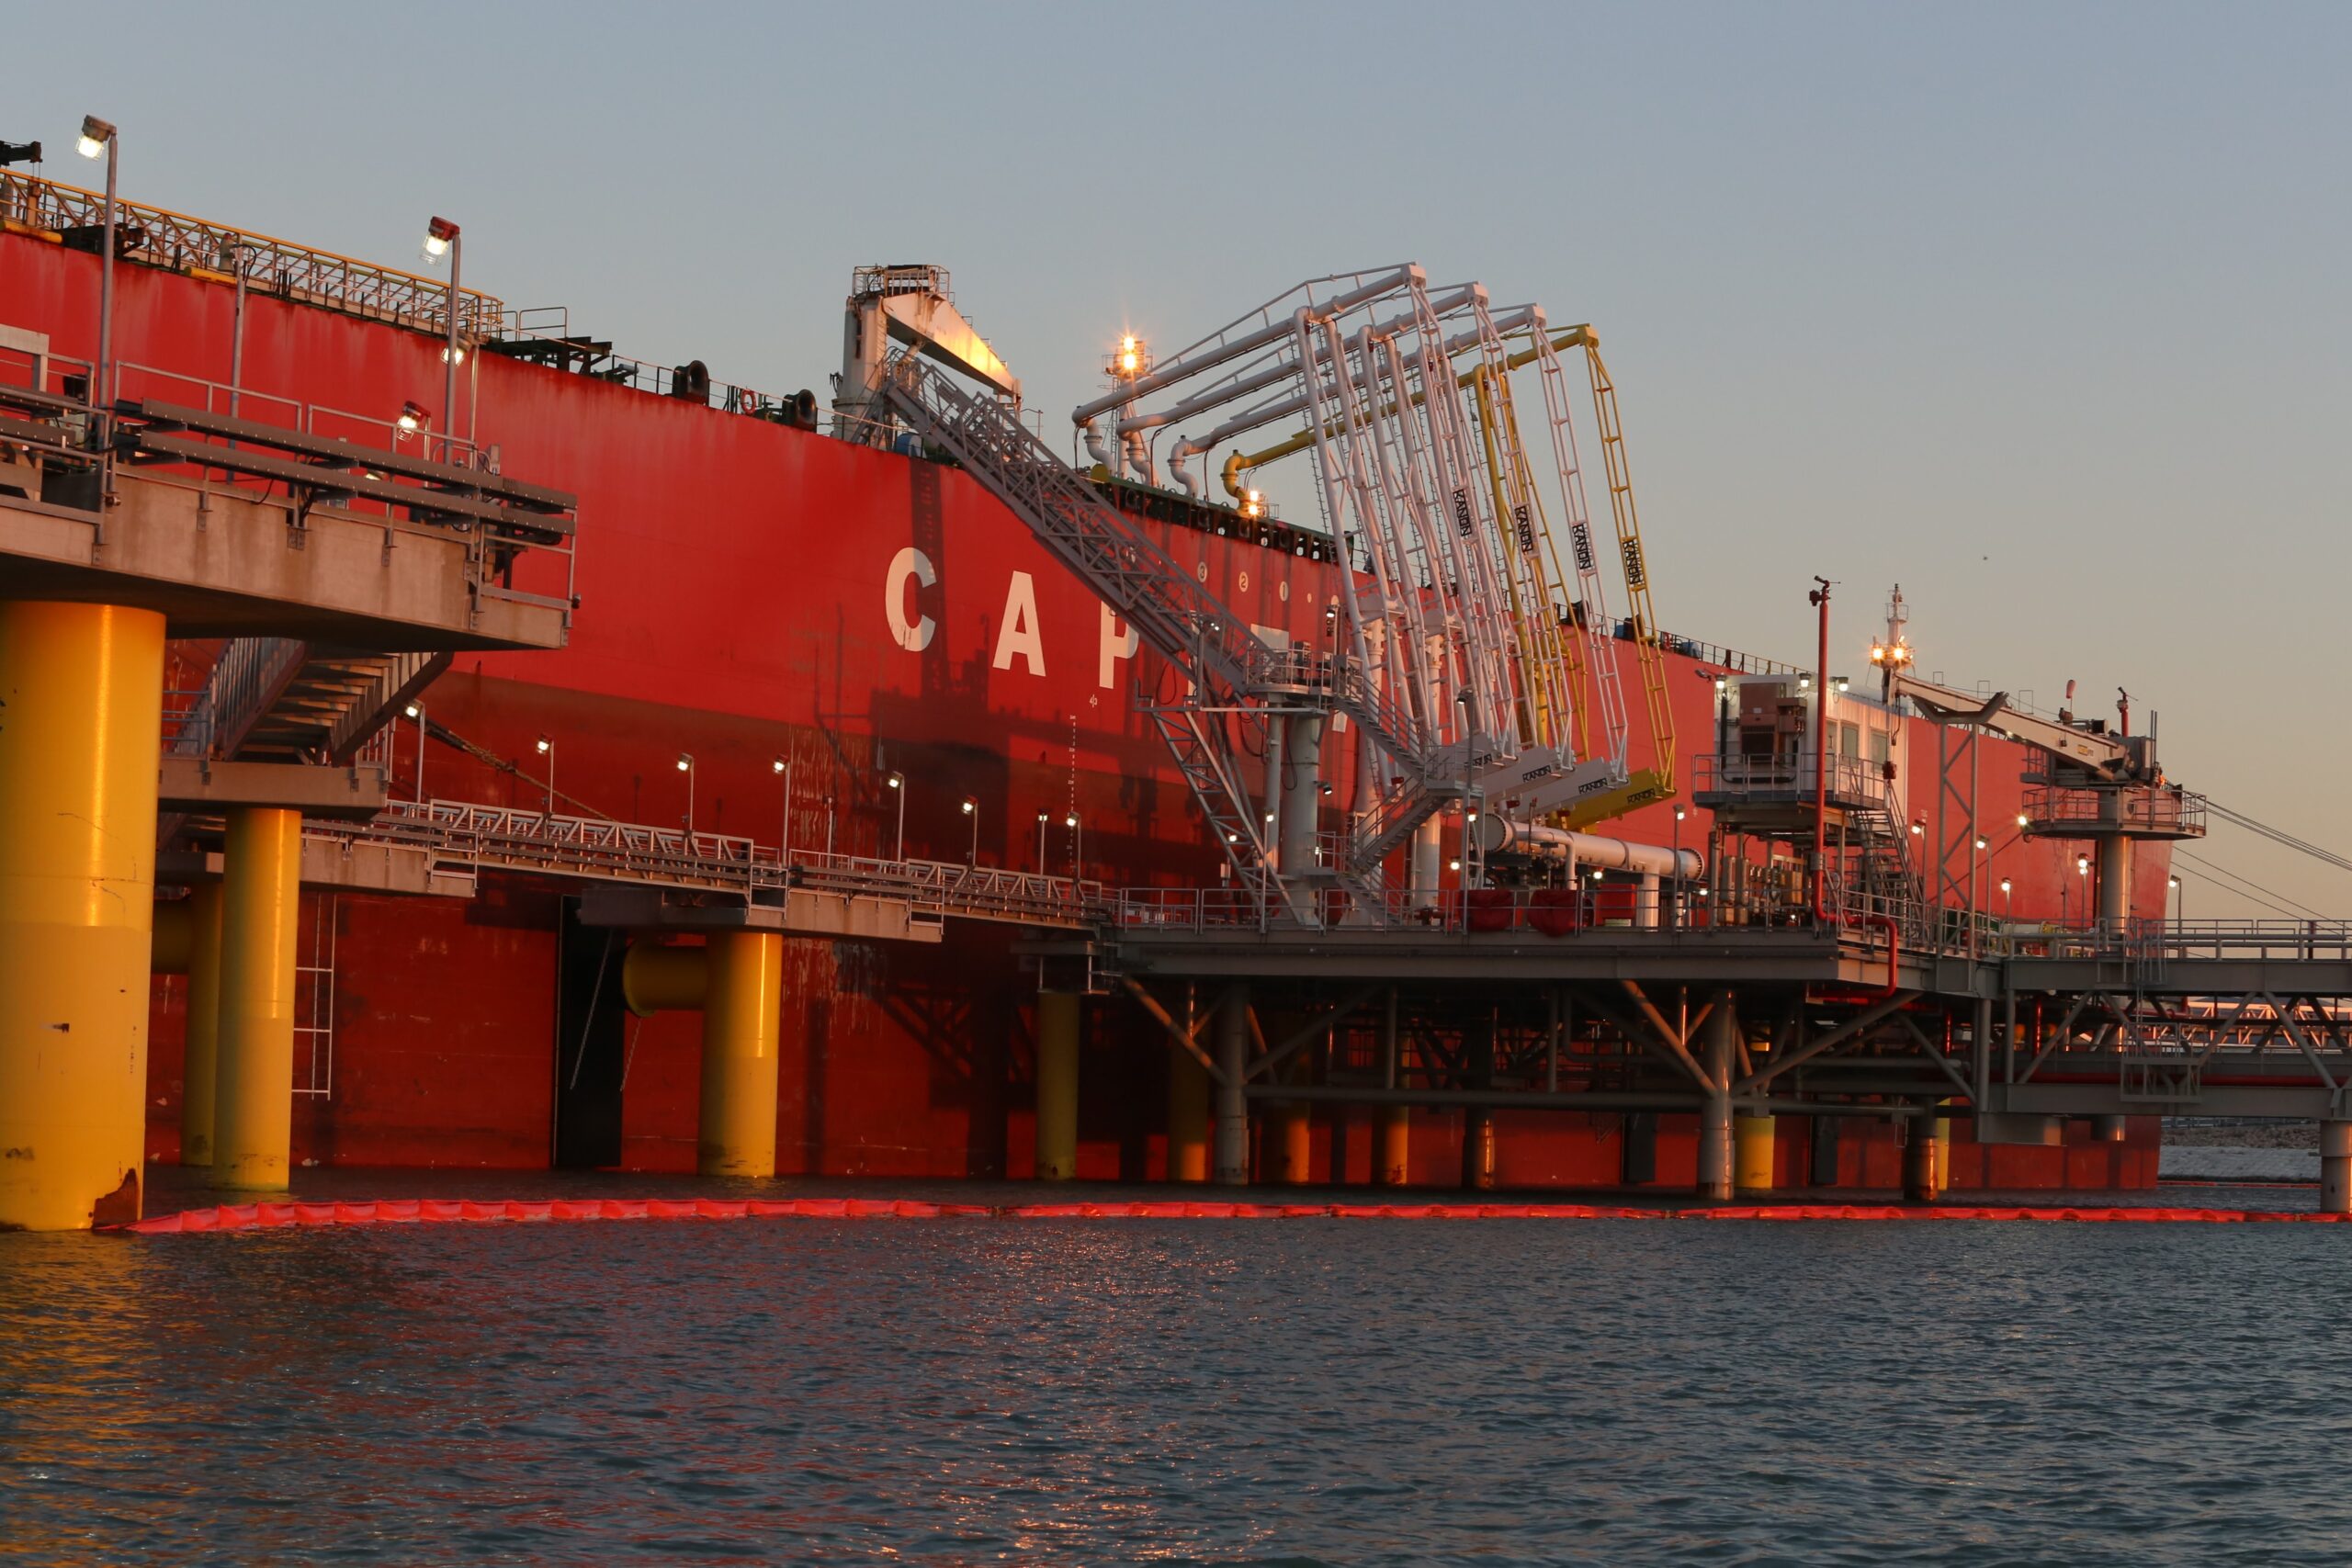 Tall piping and a gangway attach a massive red tanker to a dock.